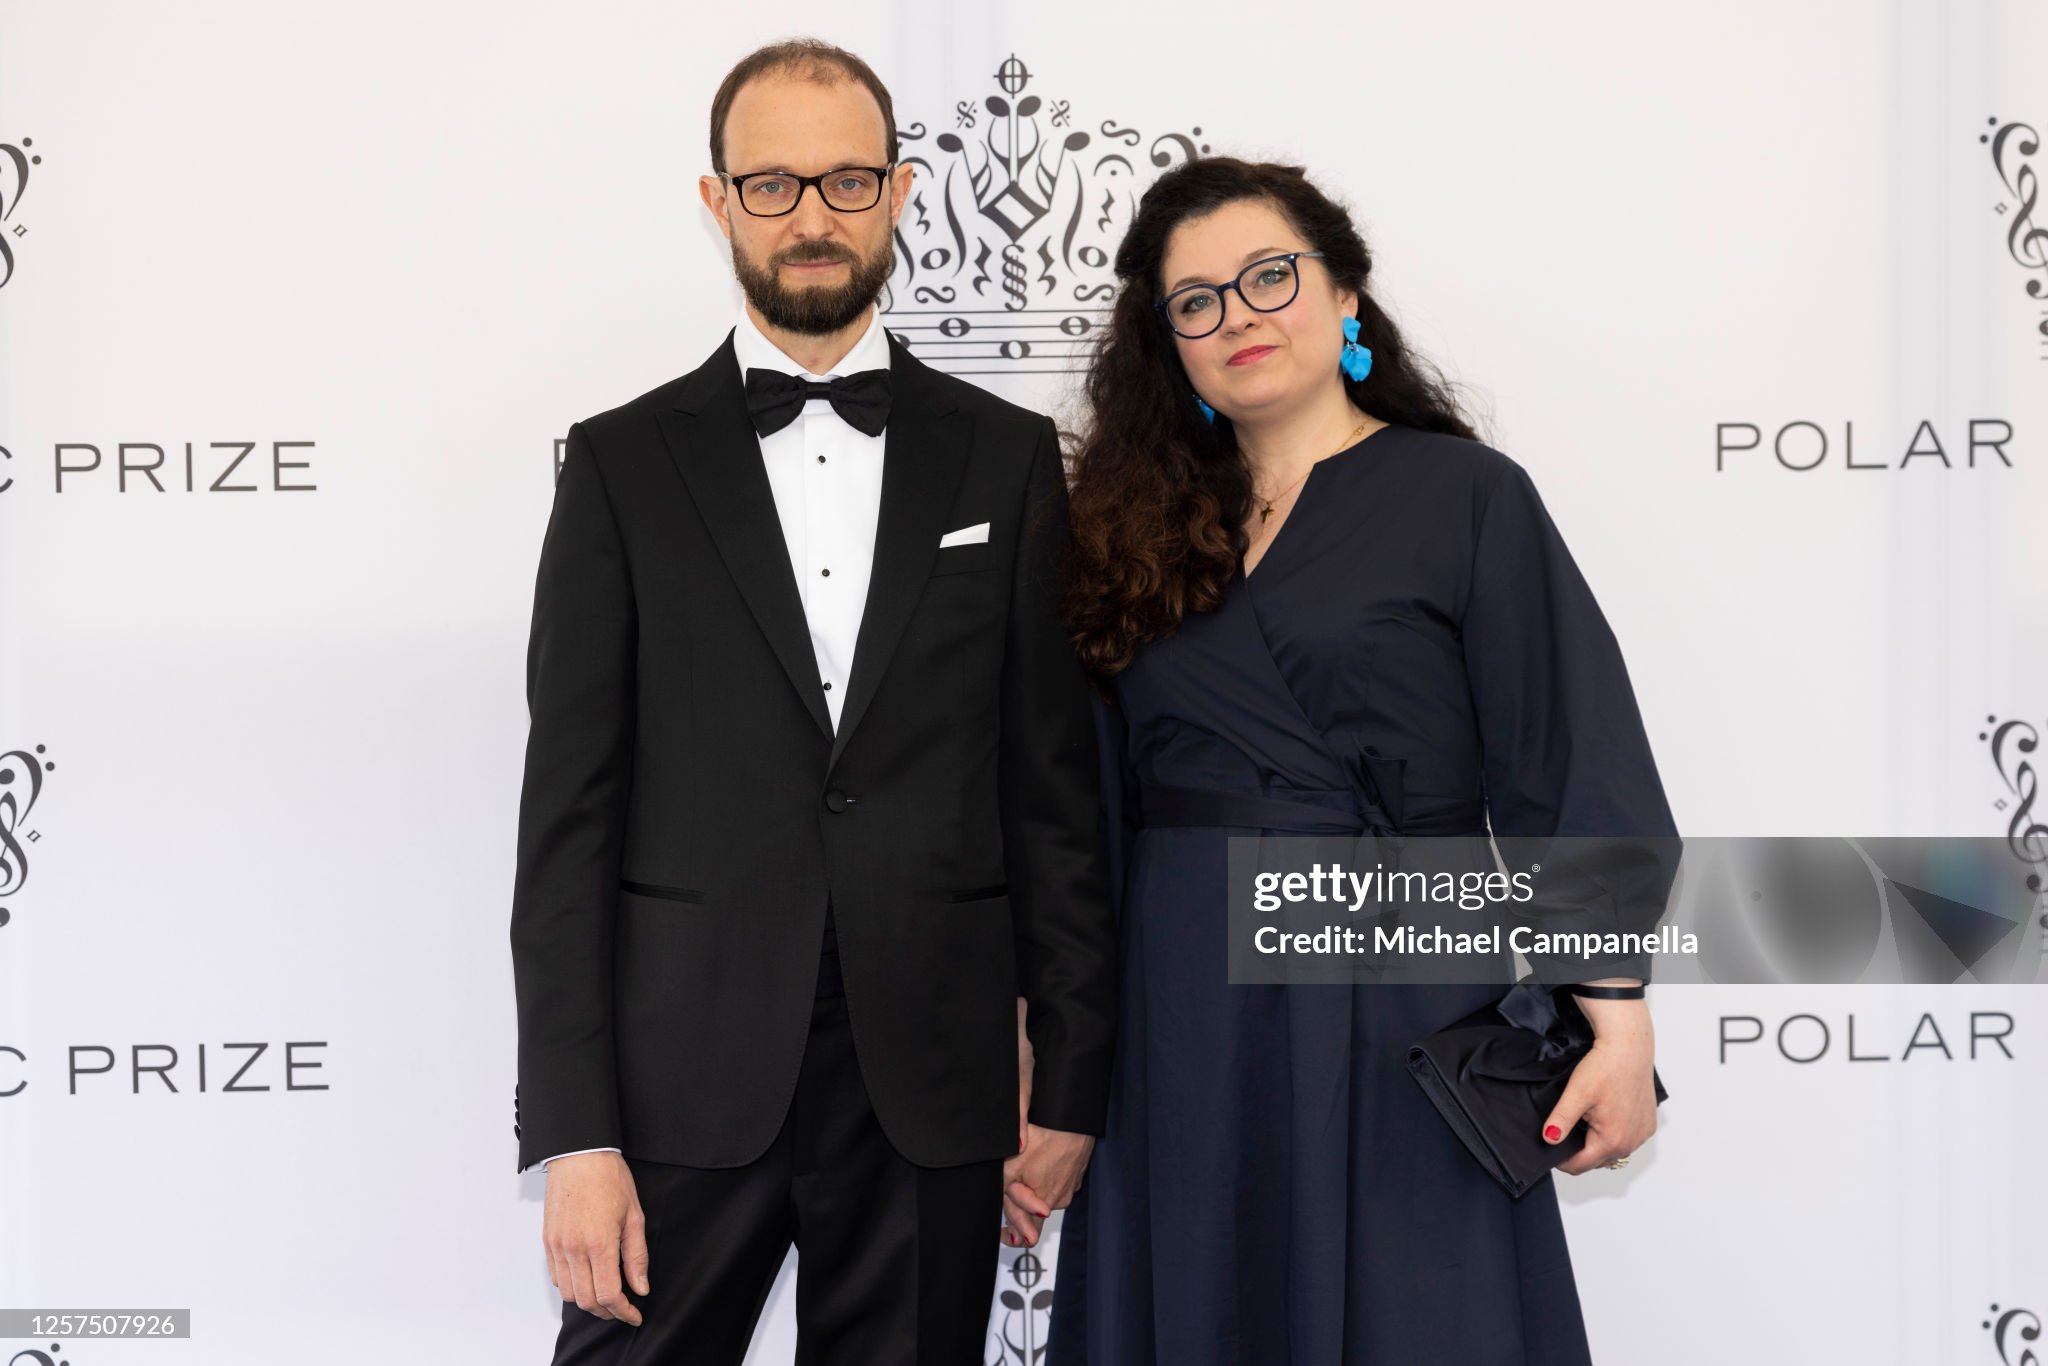 michael-prat-son-of-2023-laureate-arco-part-attends-the-polar-music-prize-2023-on-may-23-2023.jpg